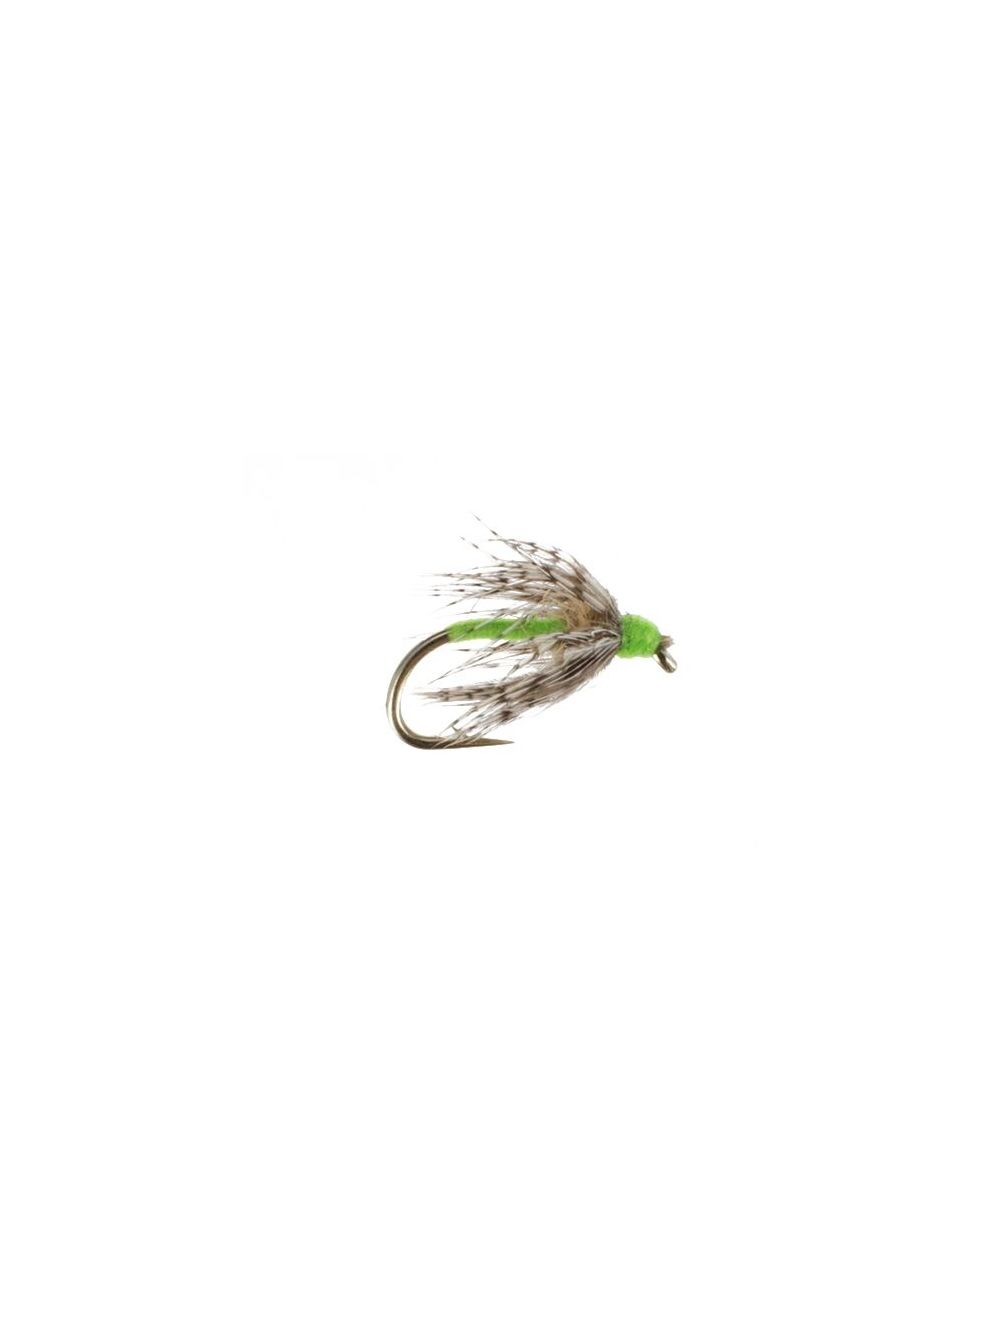 Soft Hackle, Bright Green TheFlyStop